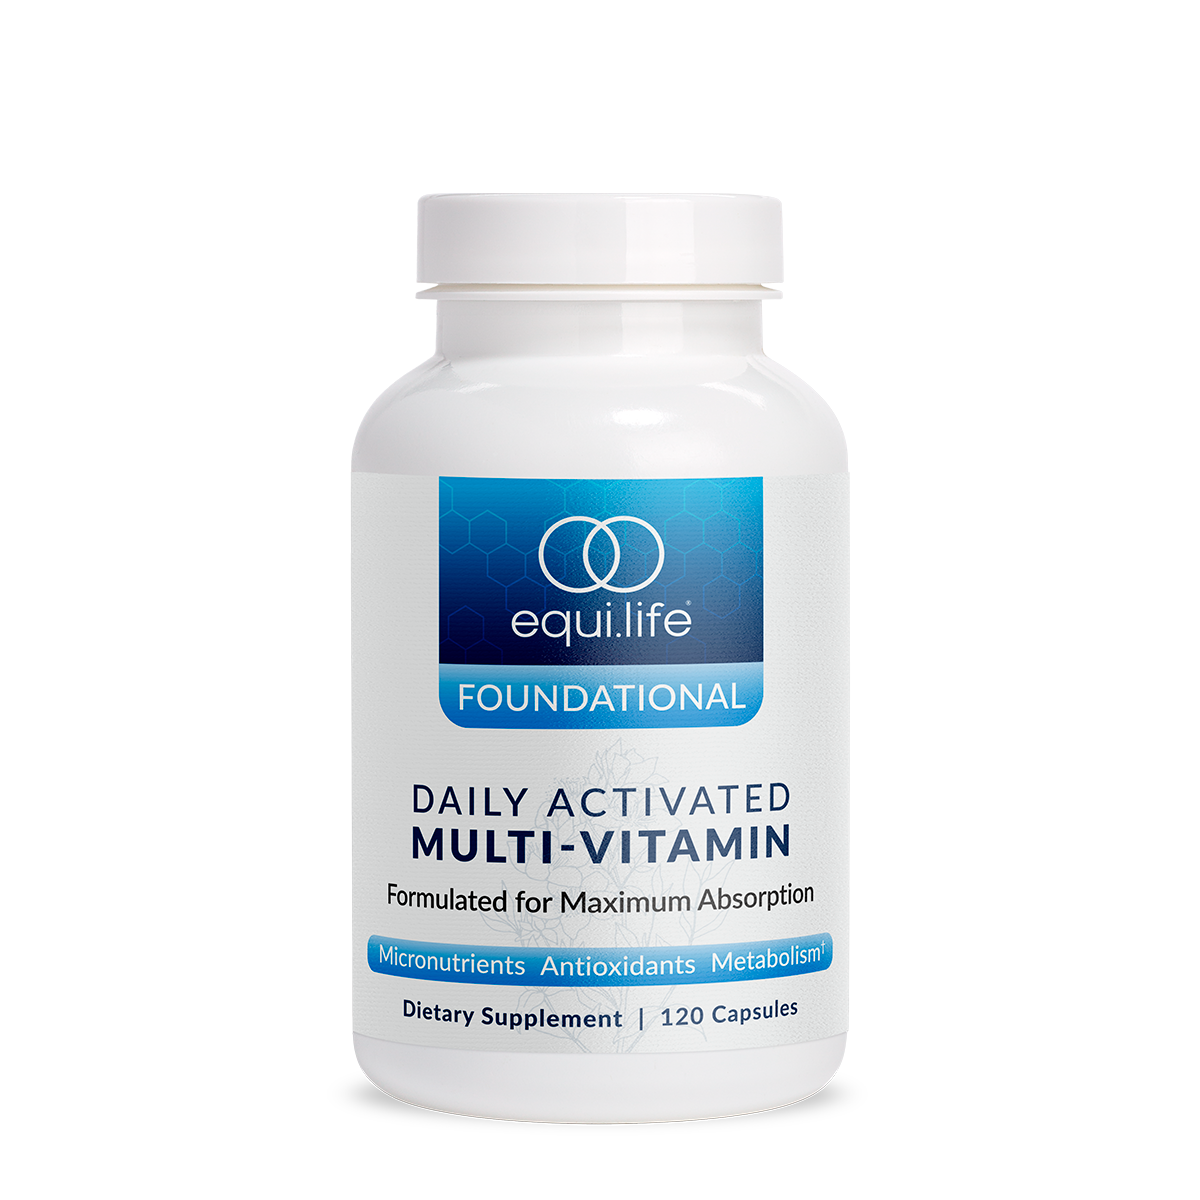 Daily Activated Multi-Vitamin